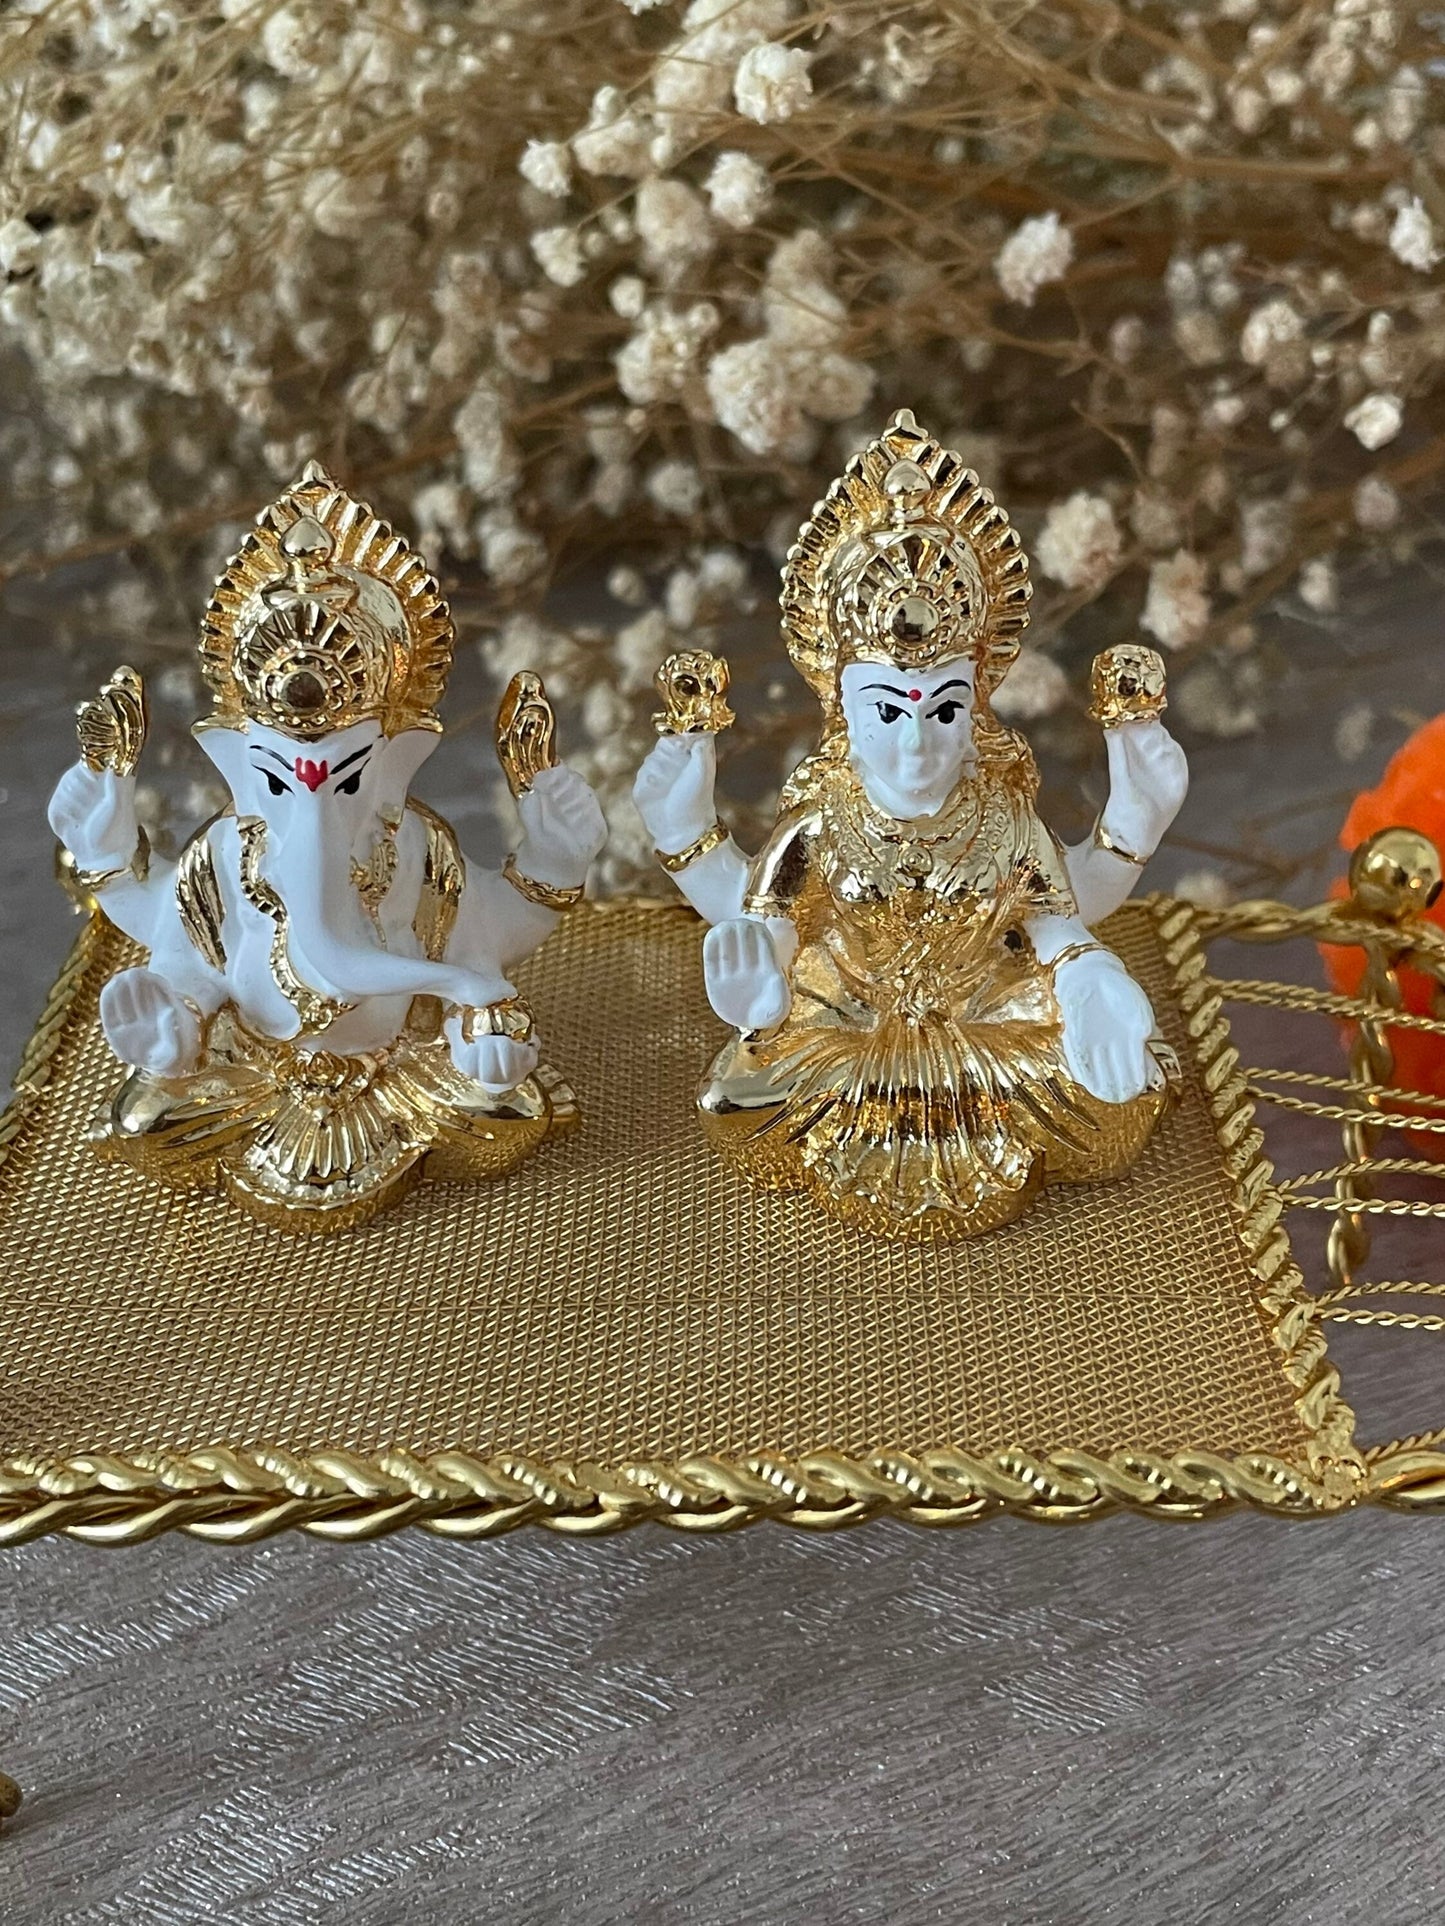 Lakshmi and Ganesh Figurines Sitting on on a Metal Khaat White Figurines with Golden plating accents Diwali Pooja Gifting